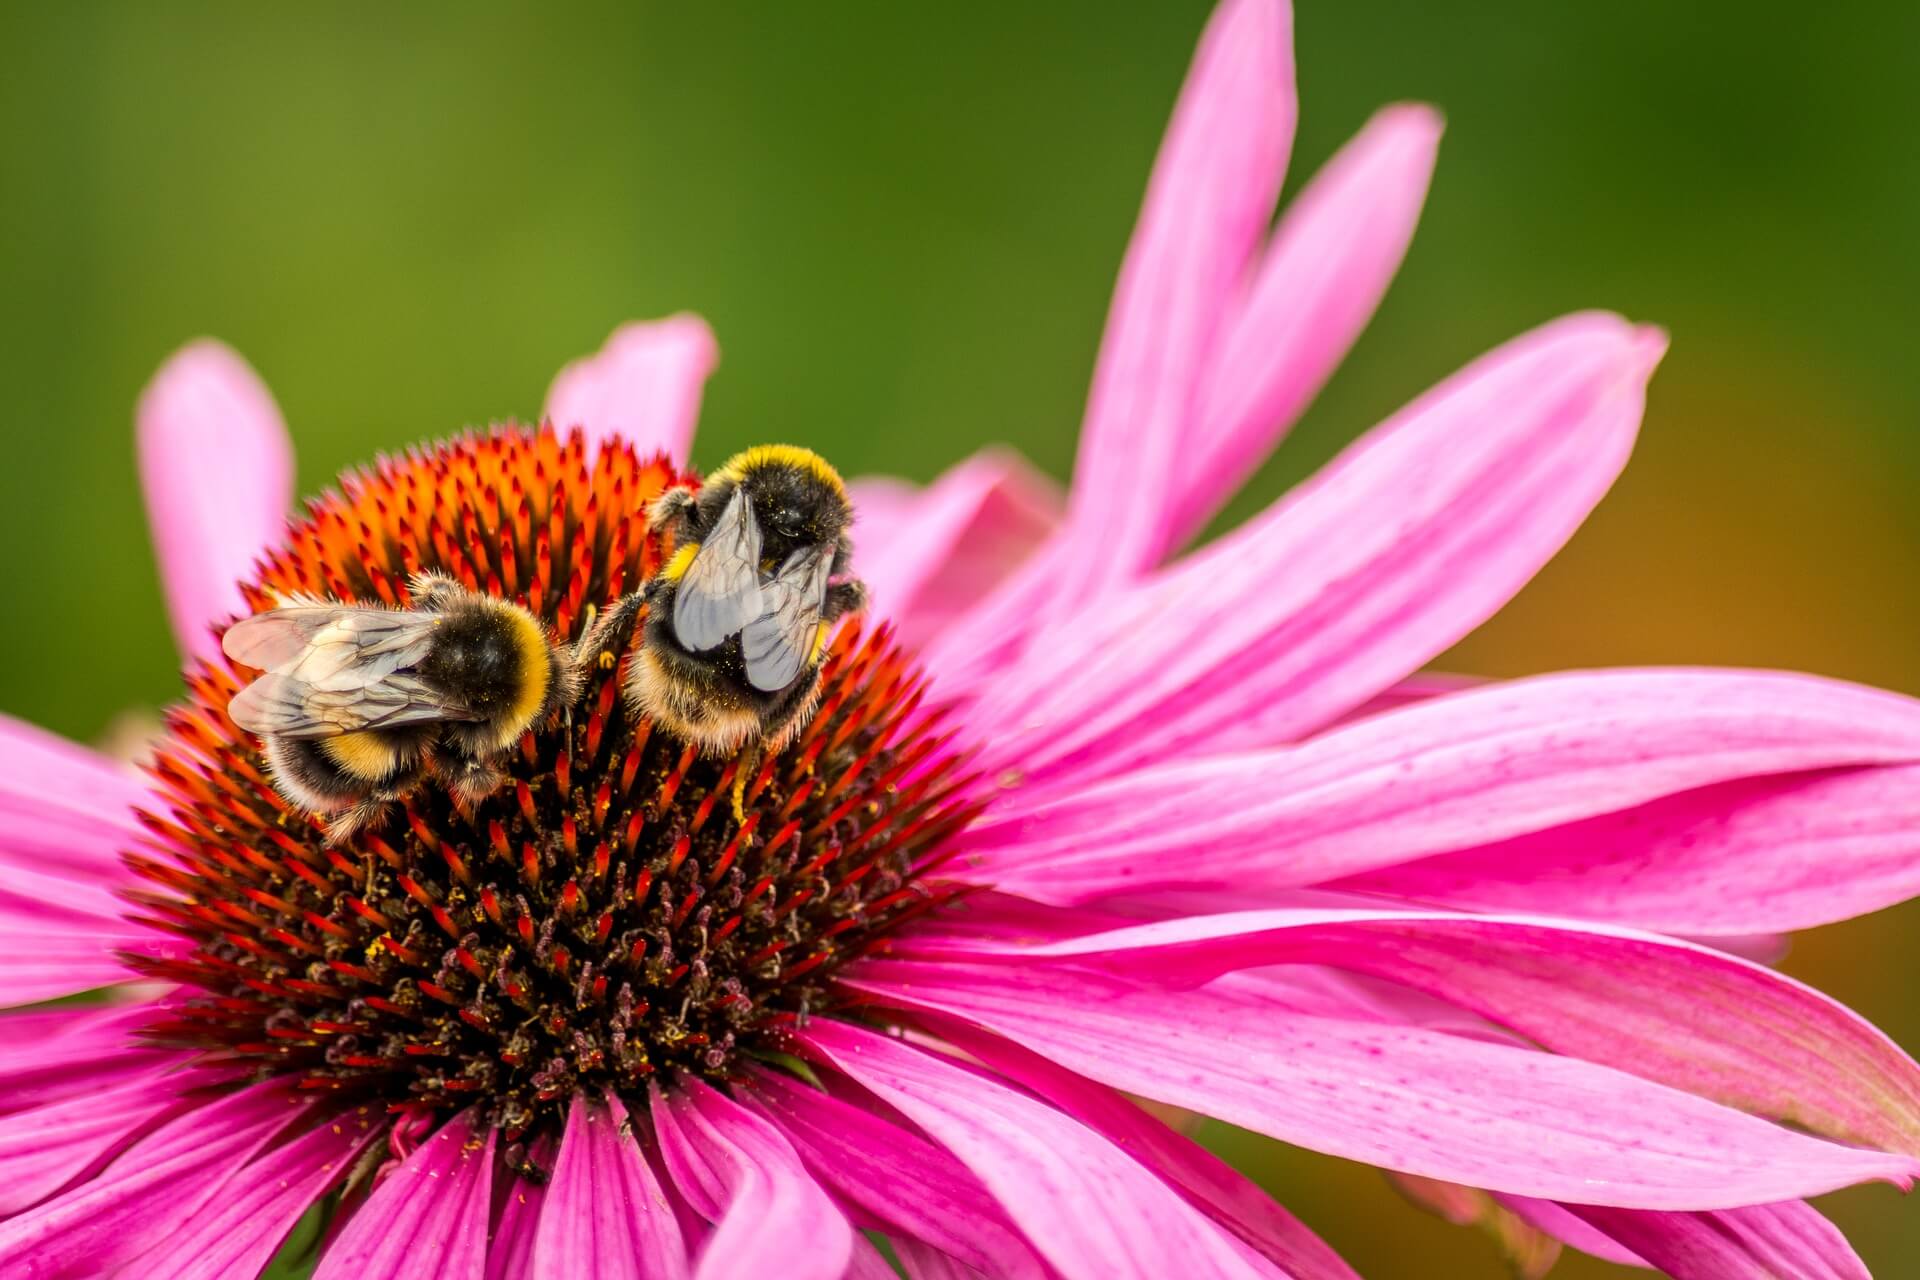 Two Bees on a pink flower